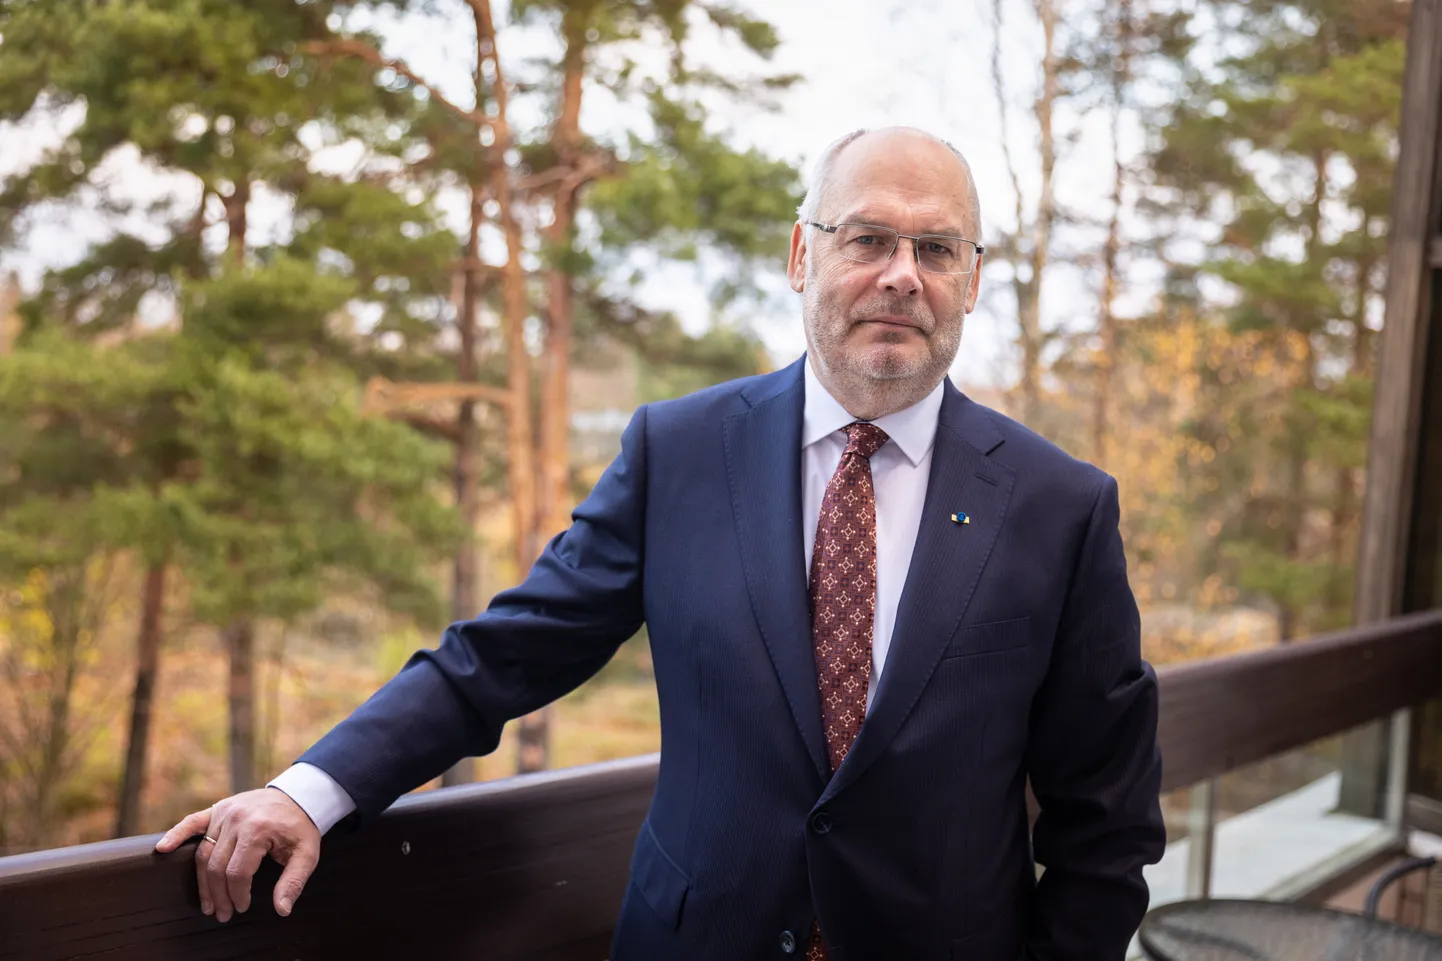 There is a clear dividing line between the Baltics, skeptical of government messages, and the rest of Europe, President Alar Karis tells Postimees in an interview..